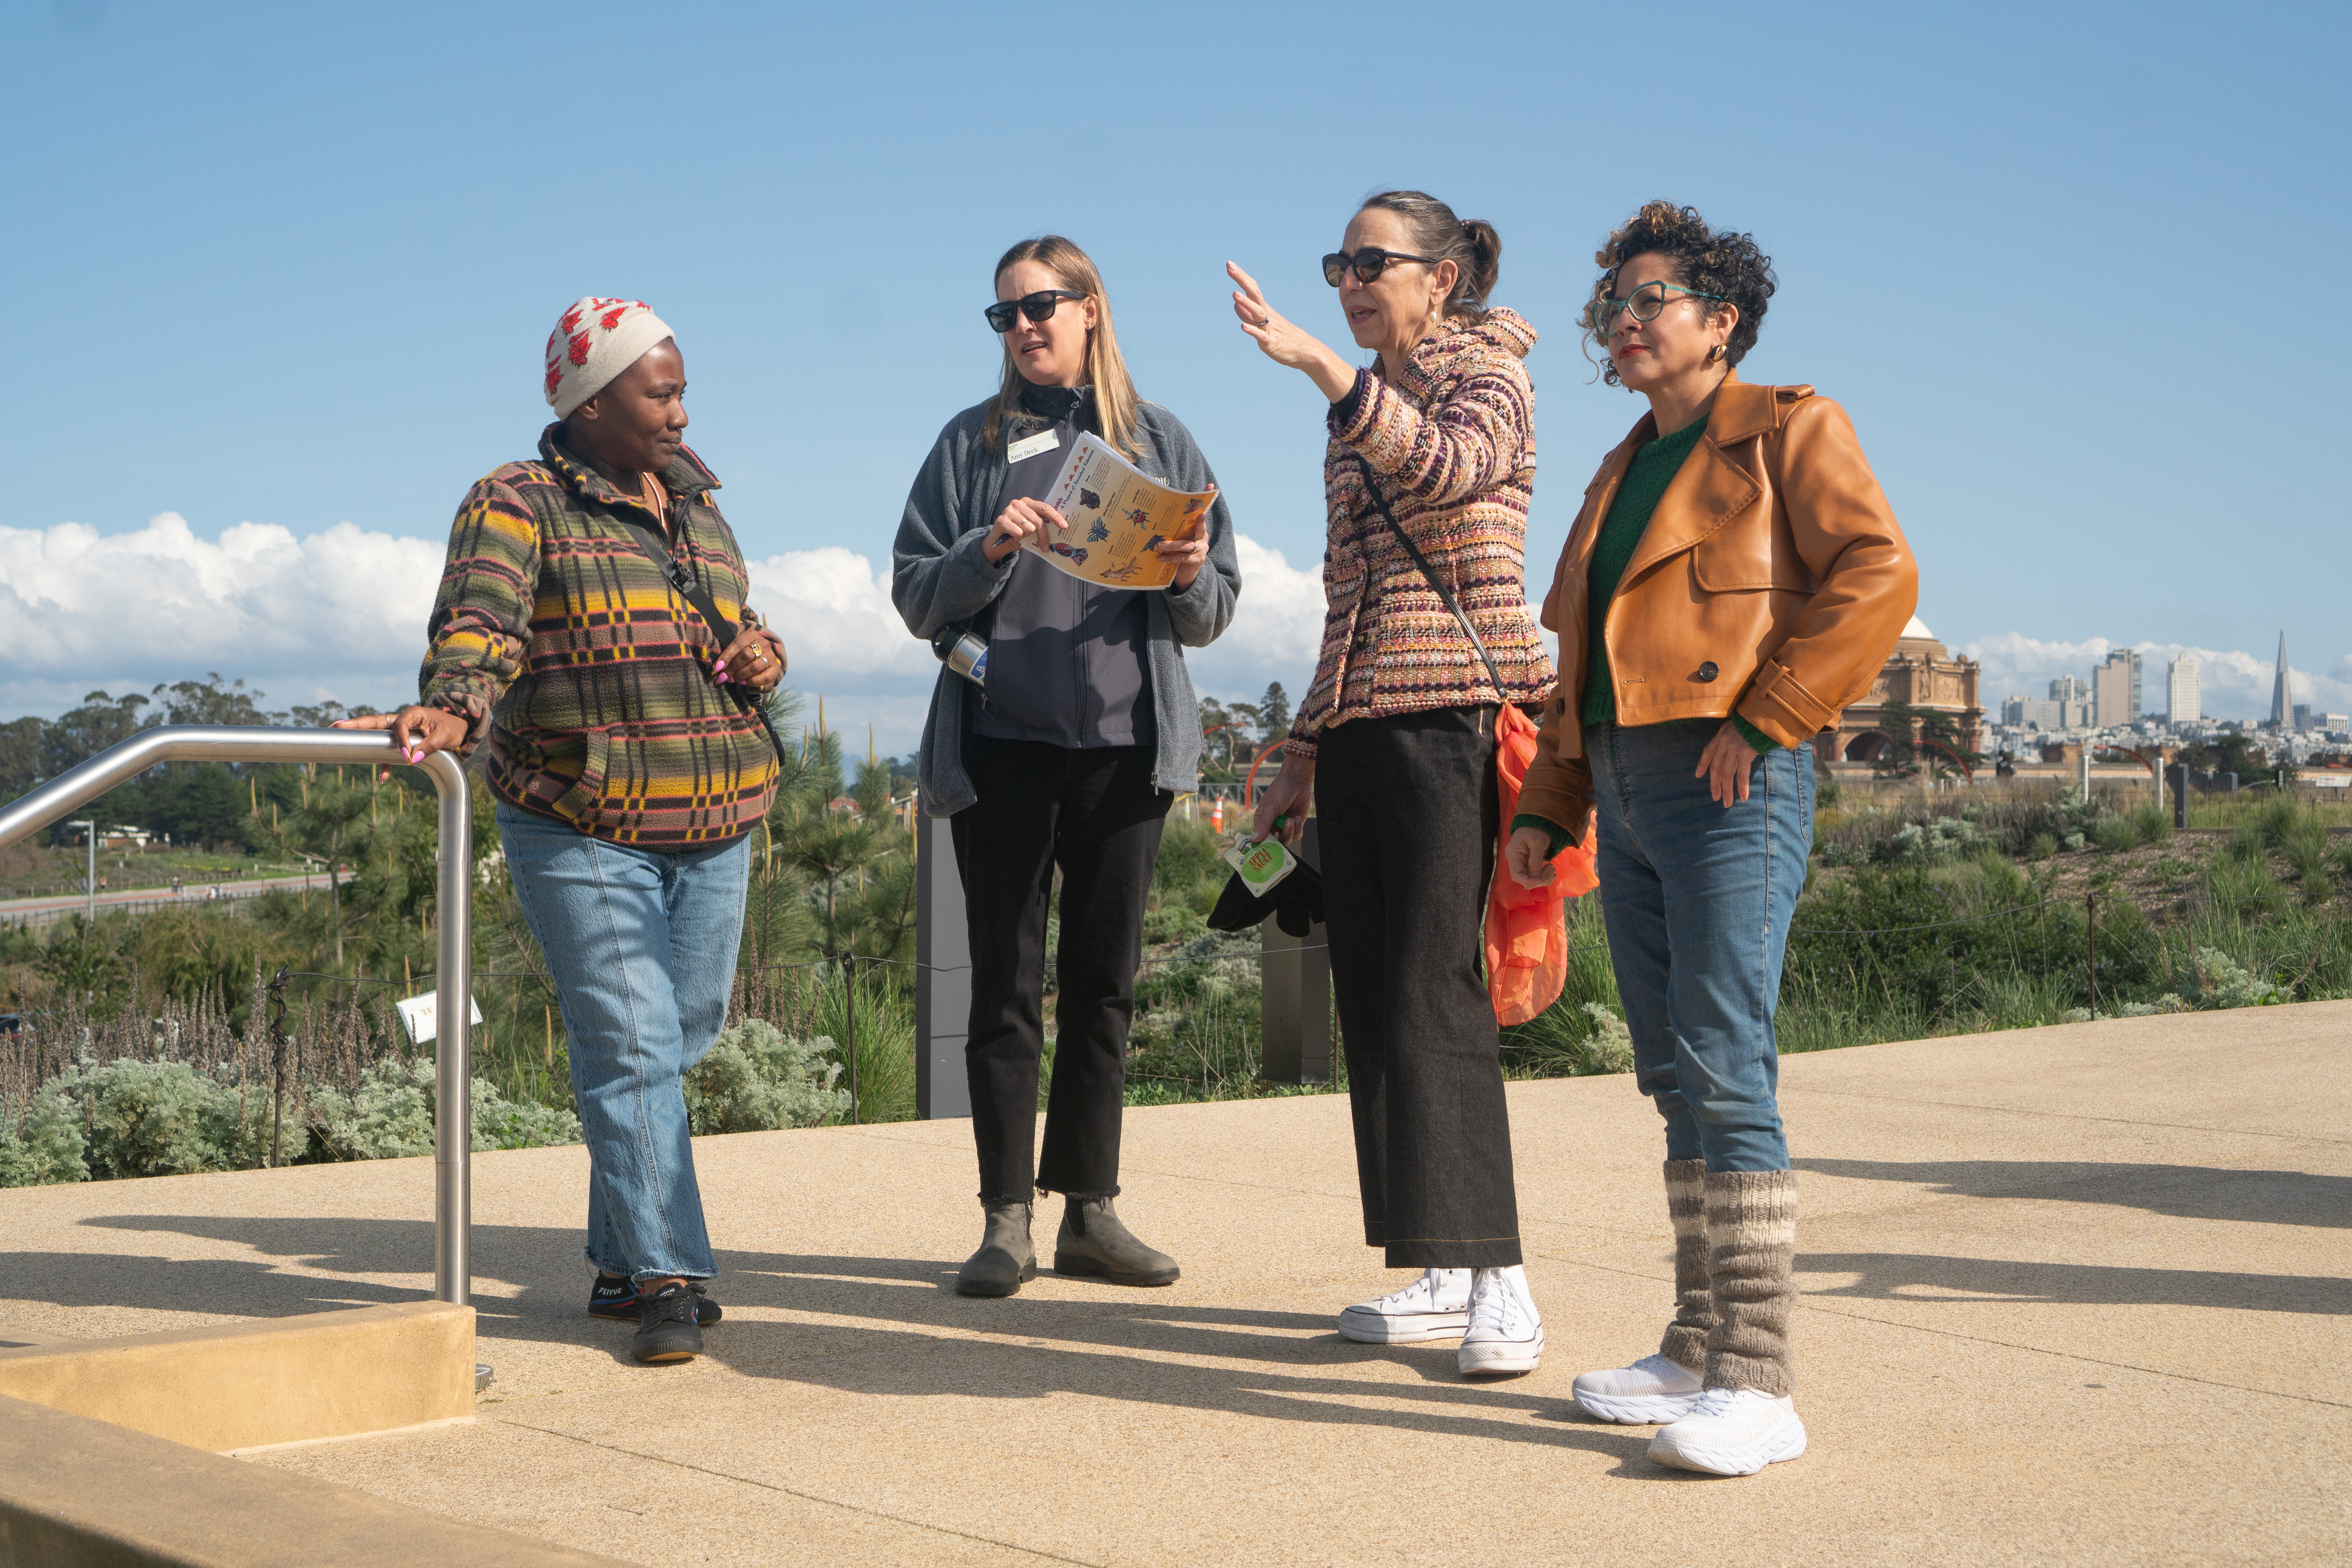 A group of women, Tosha with Favianna and representatives from the Presidio’s Community Partnership team, standing on the Presidio Tunnel Tops deep in discussion.